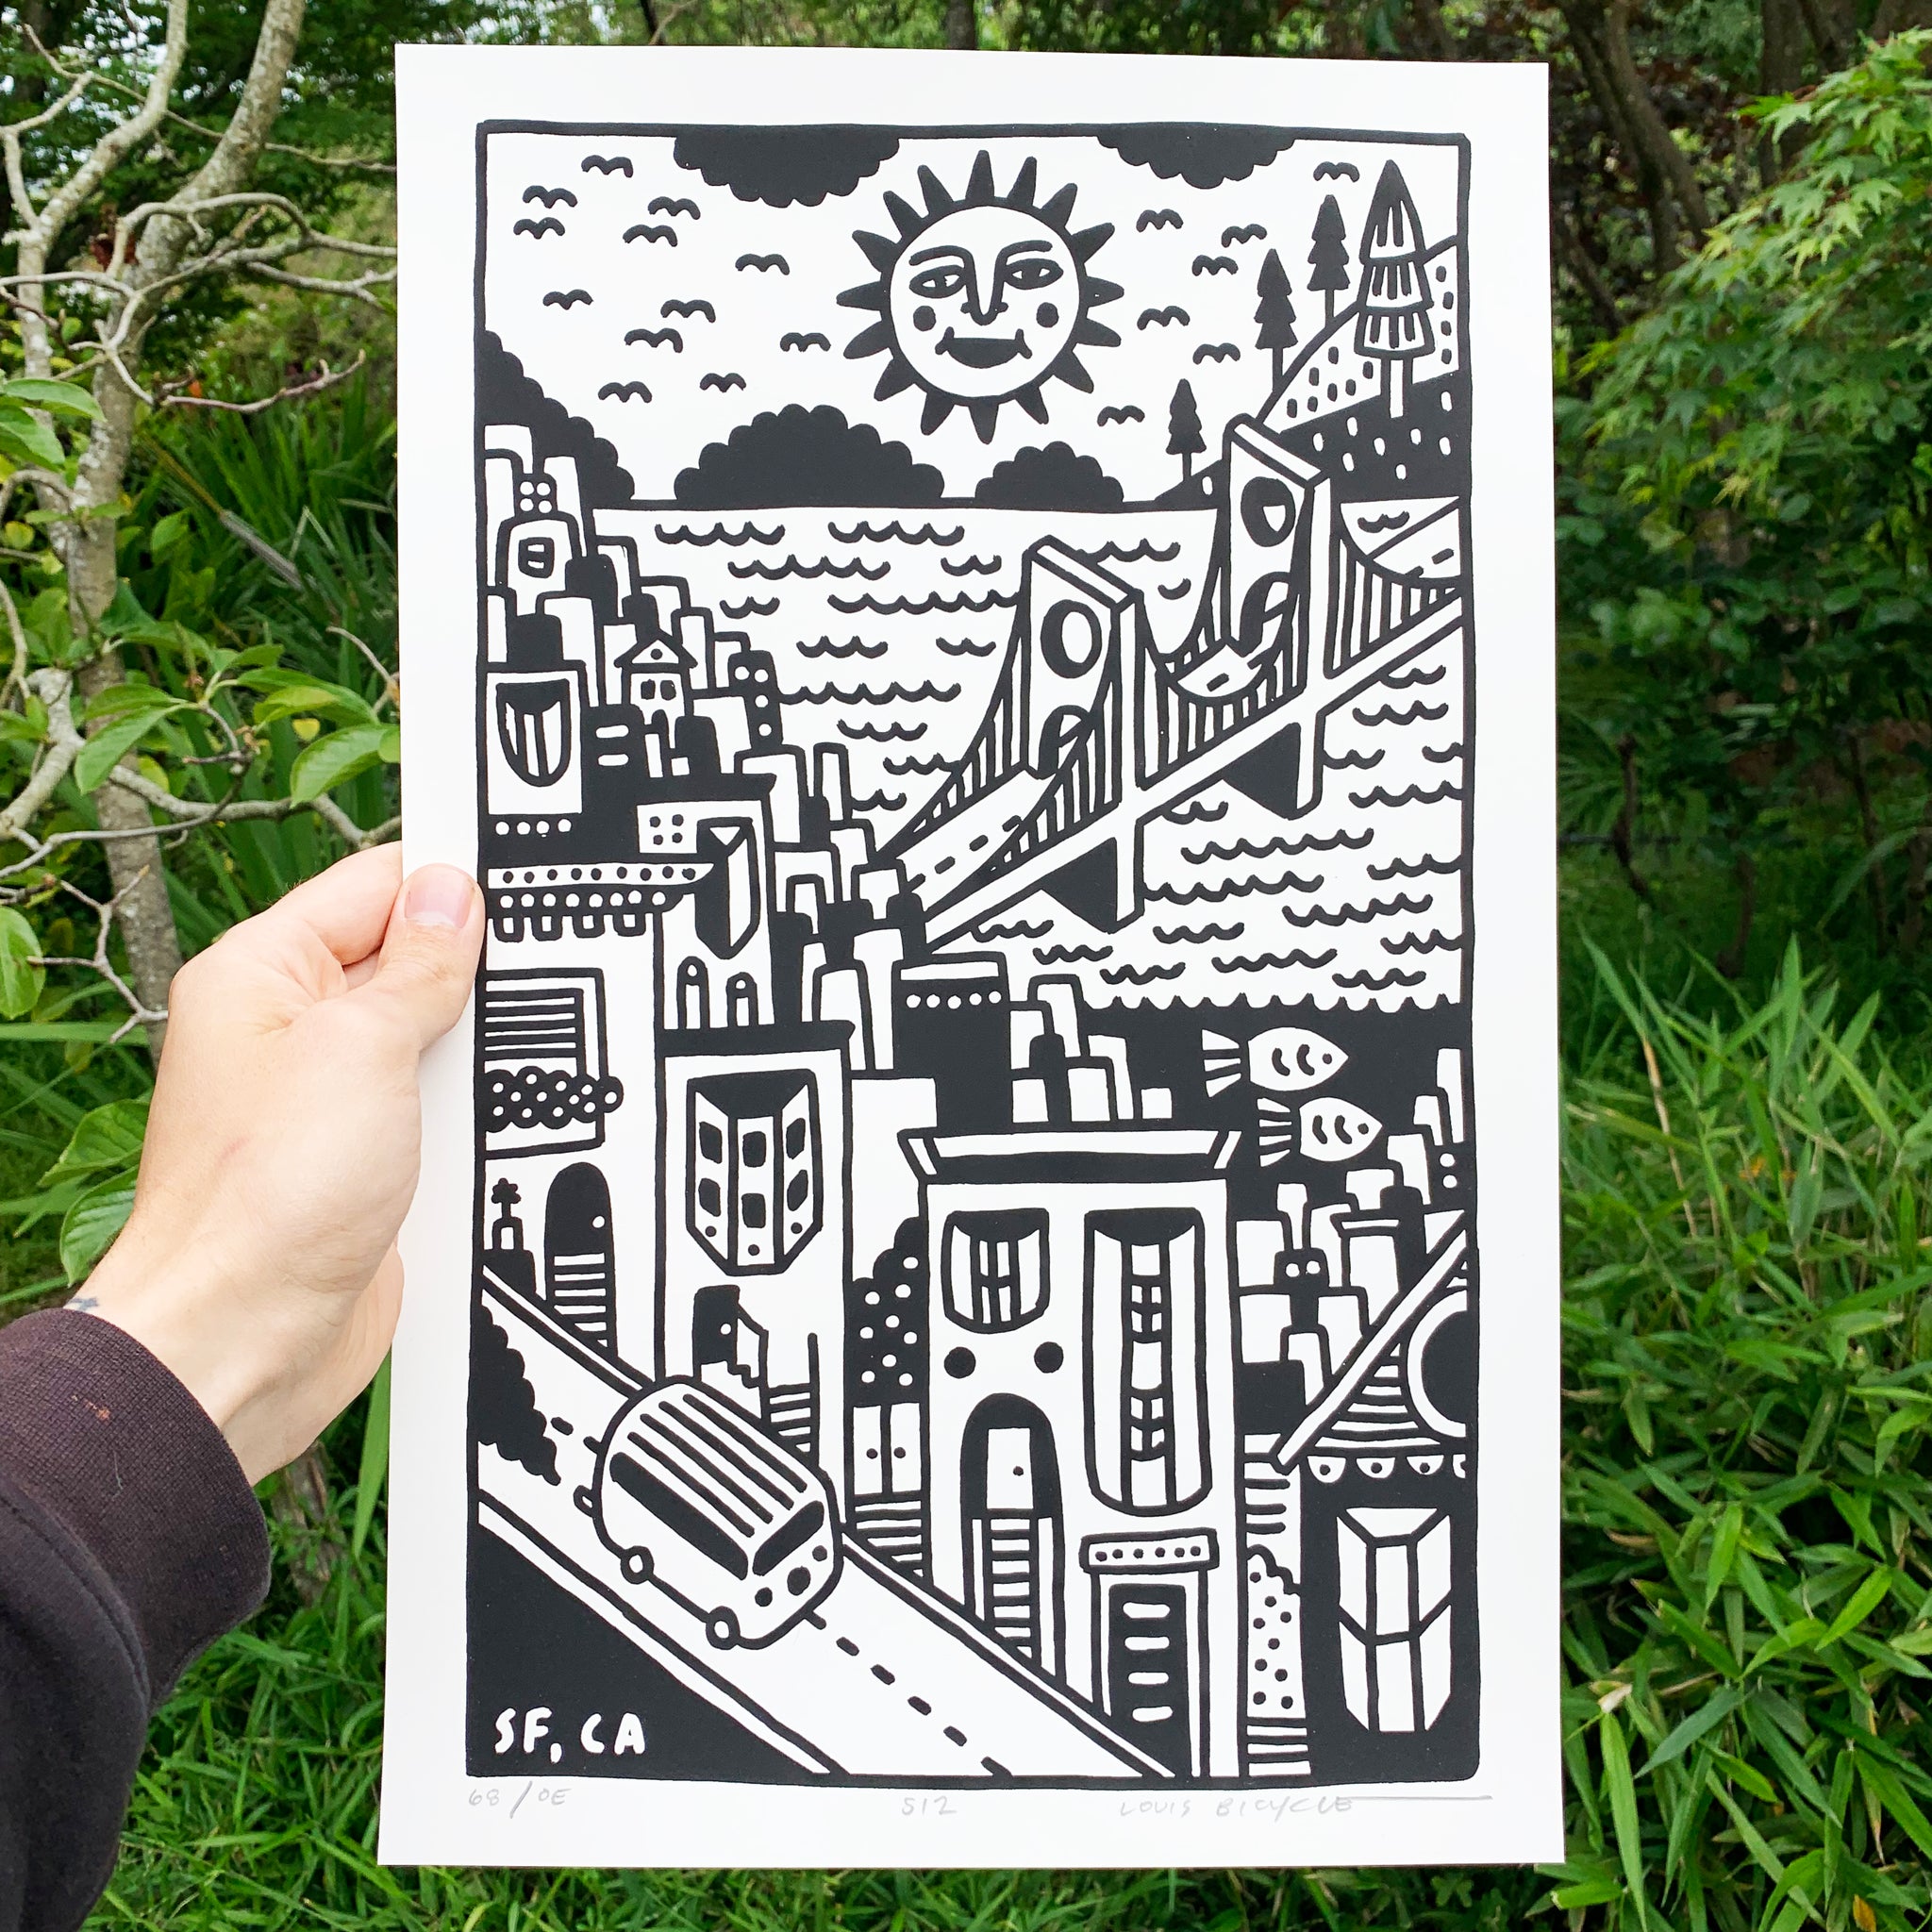 Screen printed poster by artist Louis Bicycle. Drawing of San Francisco, CA.